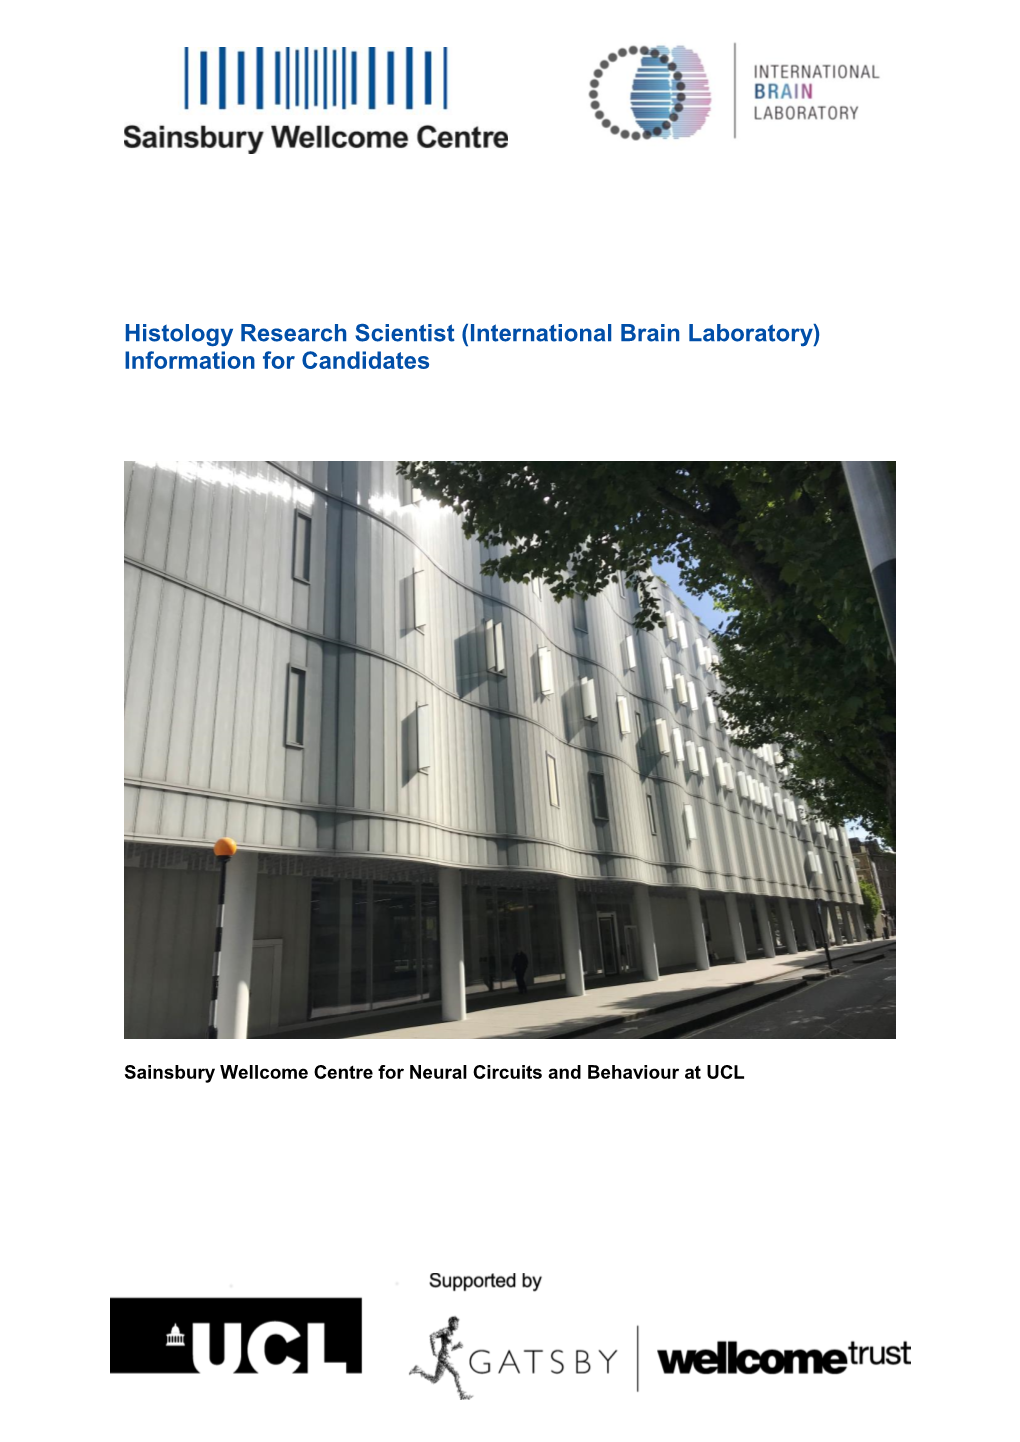 Histology Research Scientist (International Brain Laboratory) Information for Candidates